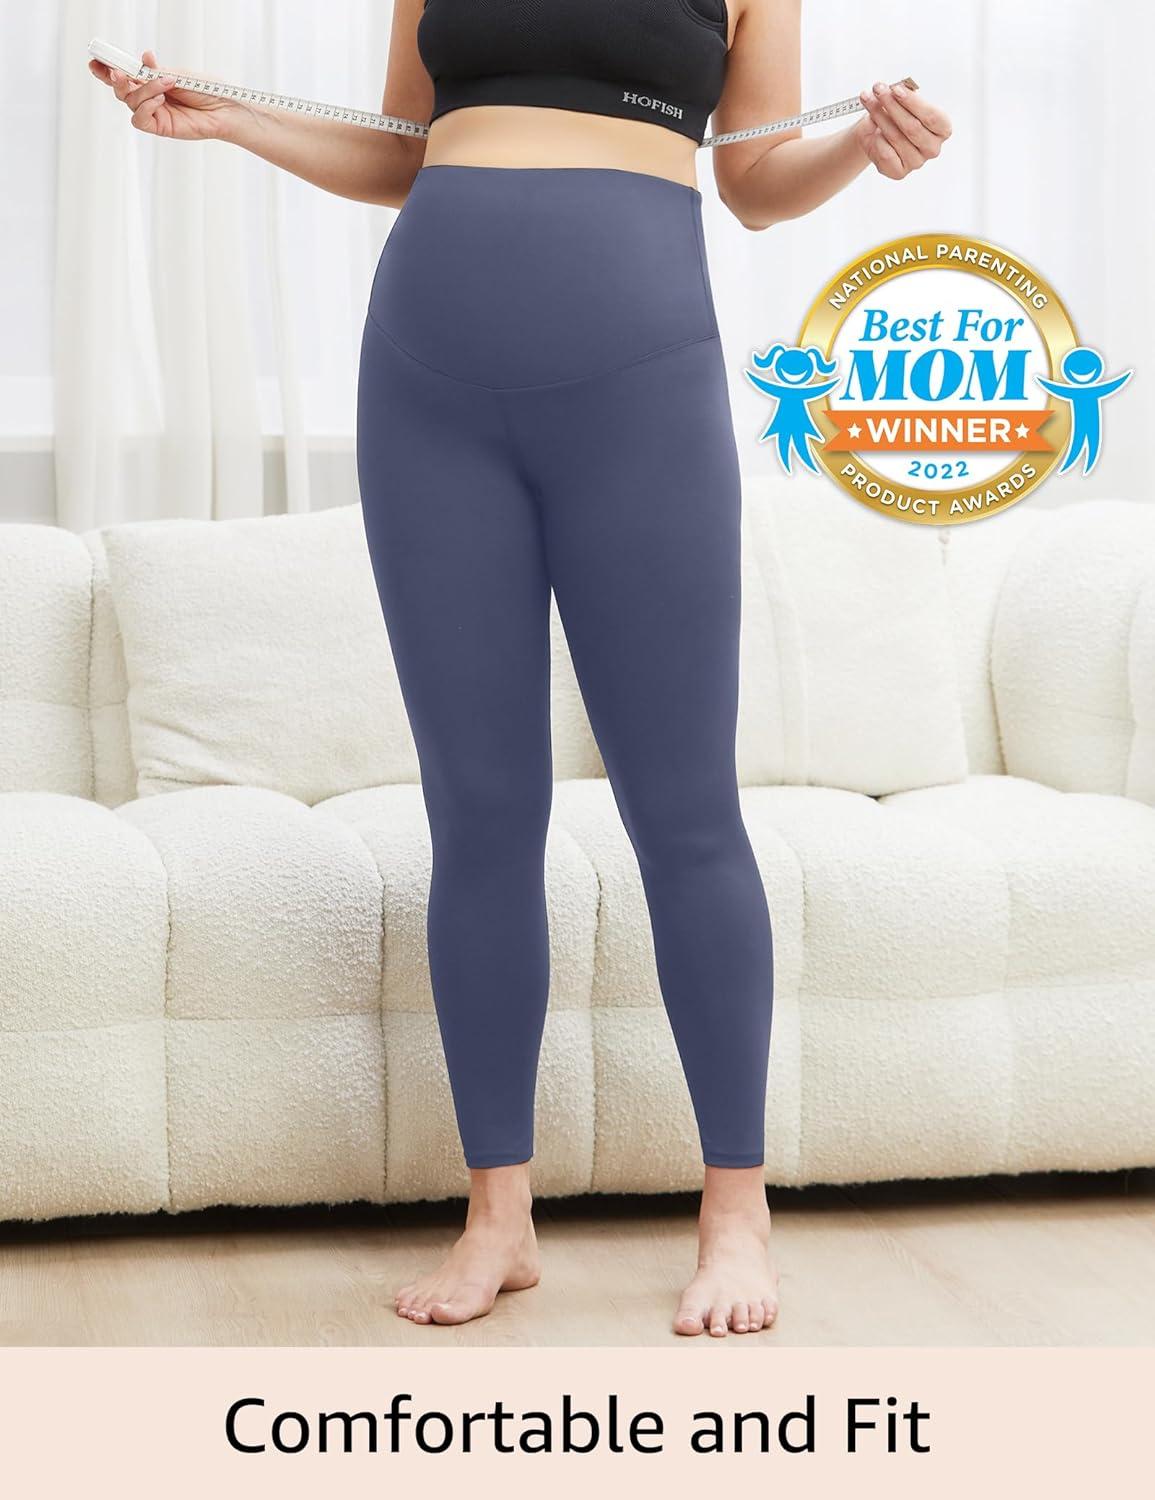  HOFISH Exercise Outfits for Women - Seamless Workout